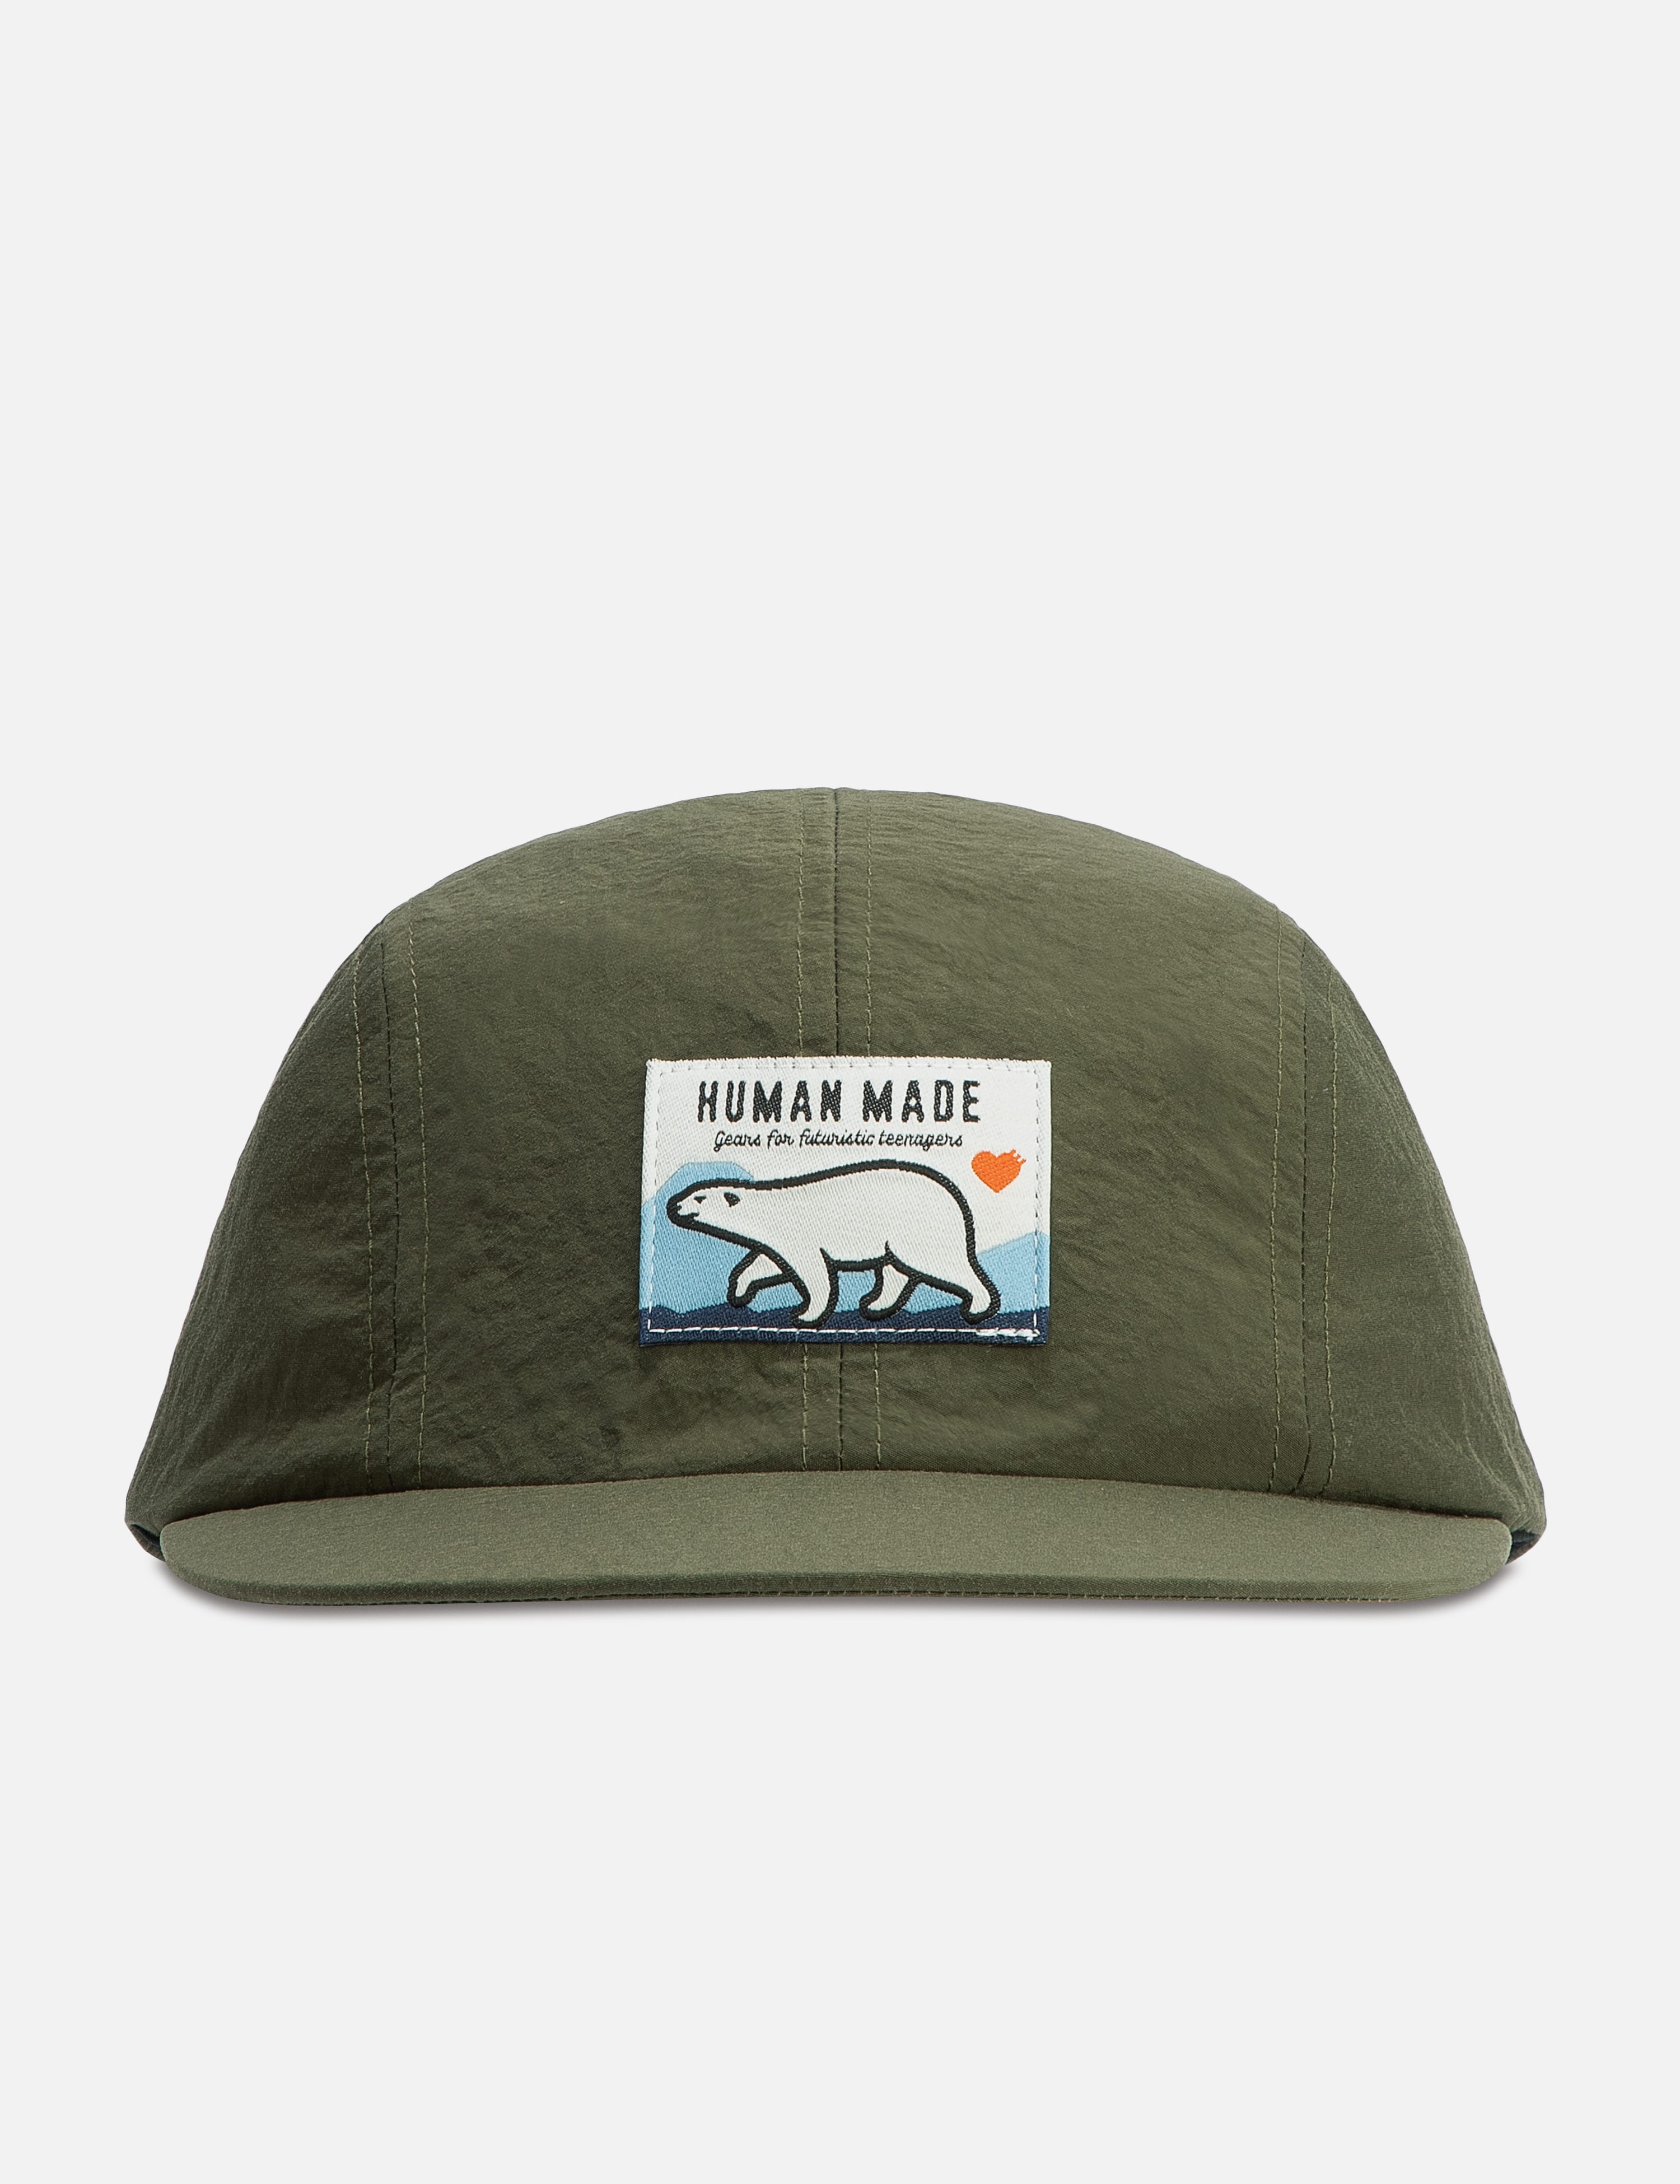 Human Made - MILITARY CAP | HBX - Globally Curated Fashion and